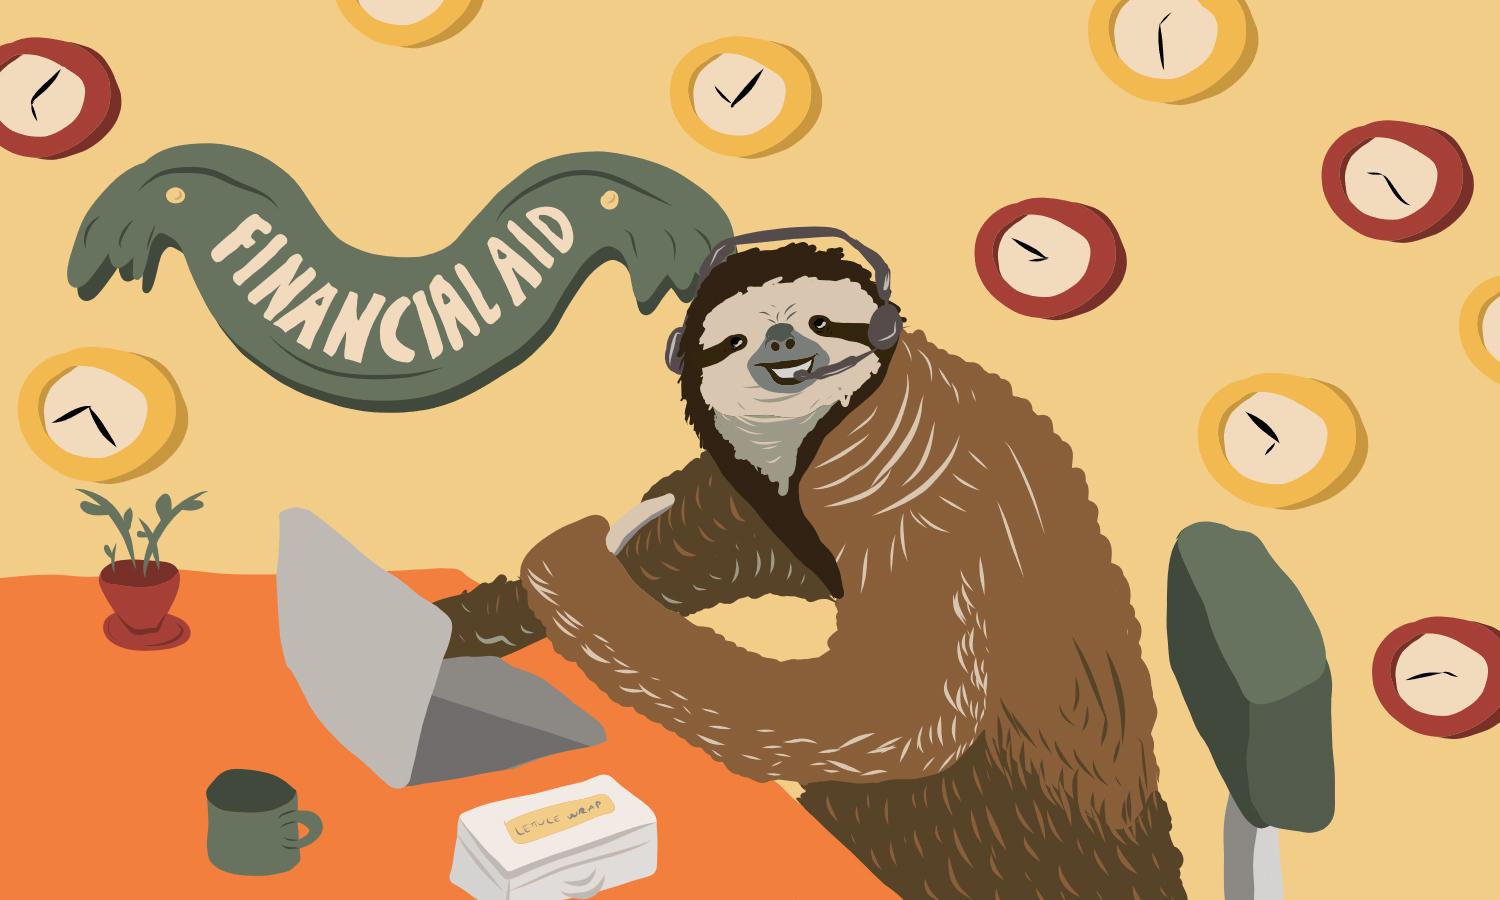 graphic illustration of a sloth at a desk for the financial aid office with clocks on the wall